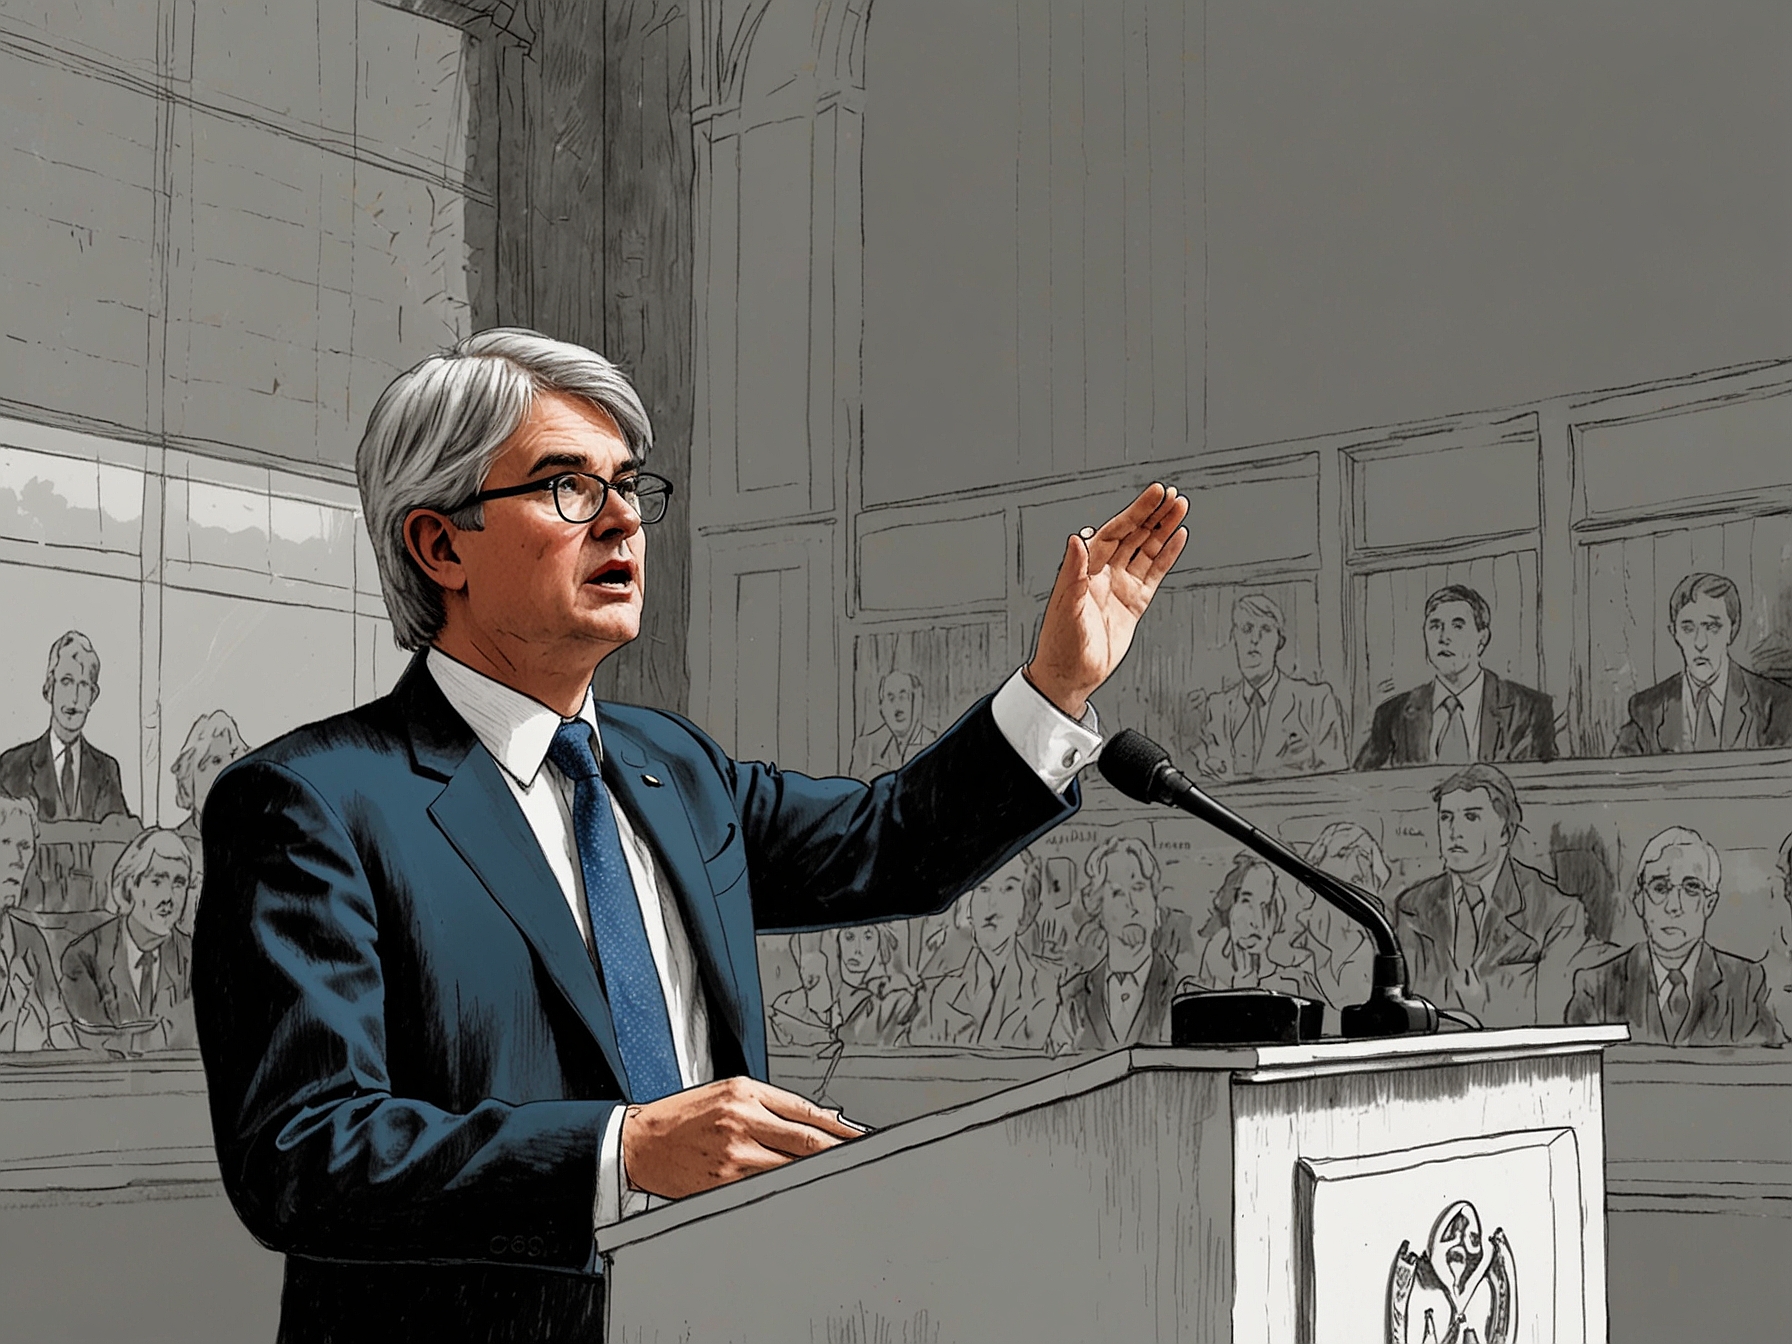 Deputy Foreign Secretary Andrew Mitchell delivers a speech, passionately criticizing his own party's climate policies, highlighting the urgency for more substantial actions to mitigate climate change.